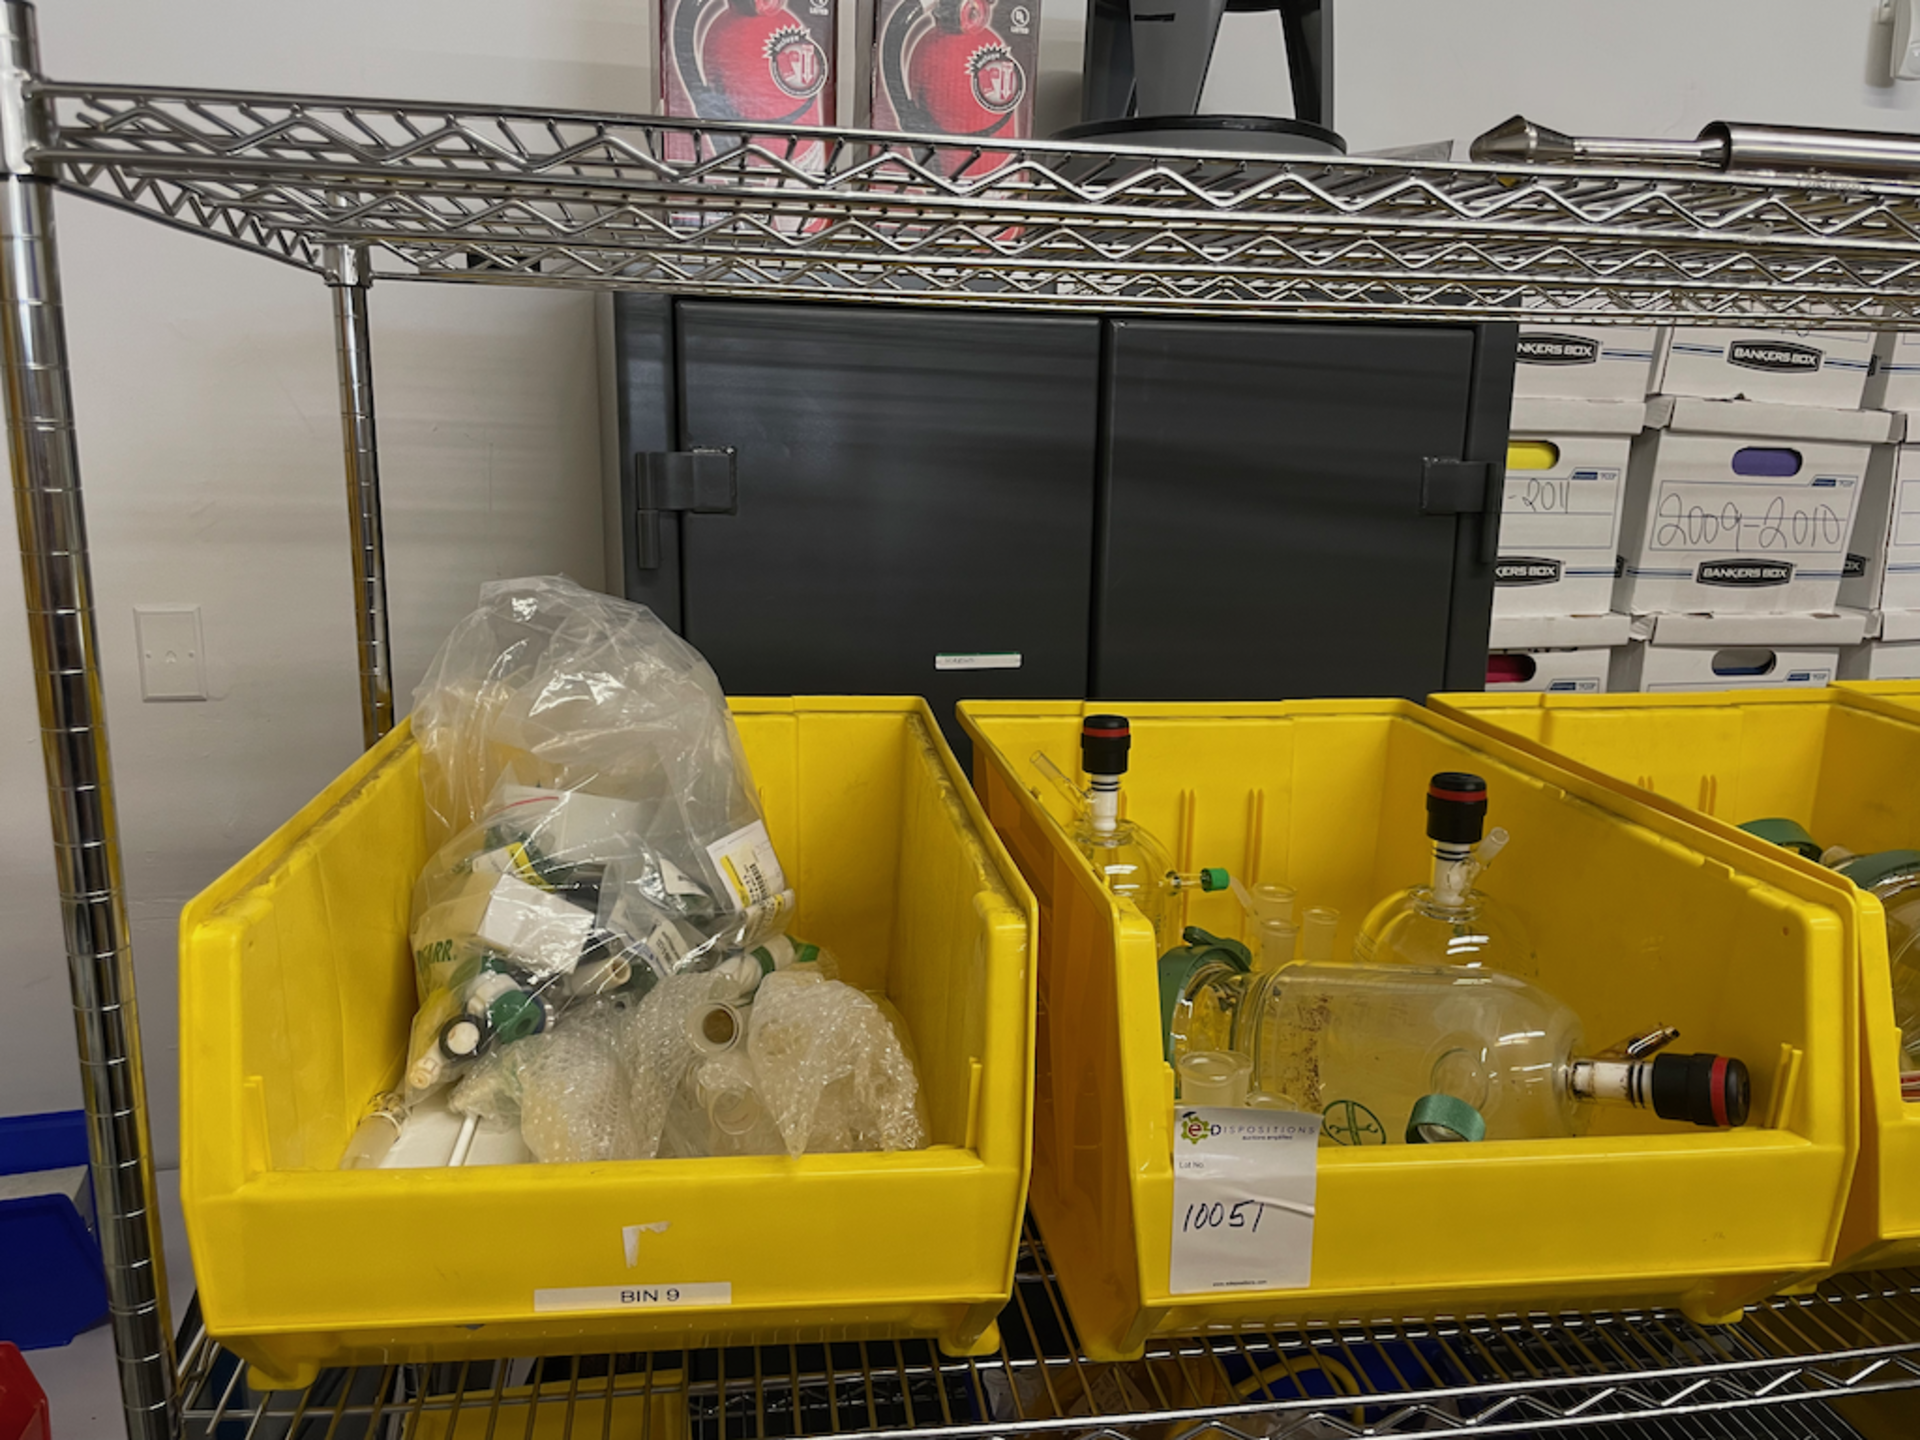 CHEMGLASS LOT CONSISTING OF THE CONTENTS OF QTY-4 YELLOW TOTE BINS CONTAINING VARIOUS CHEMGLASS - Image 2 of 9